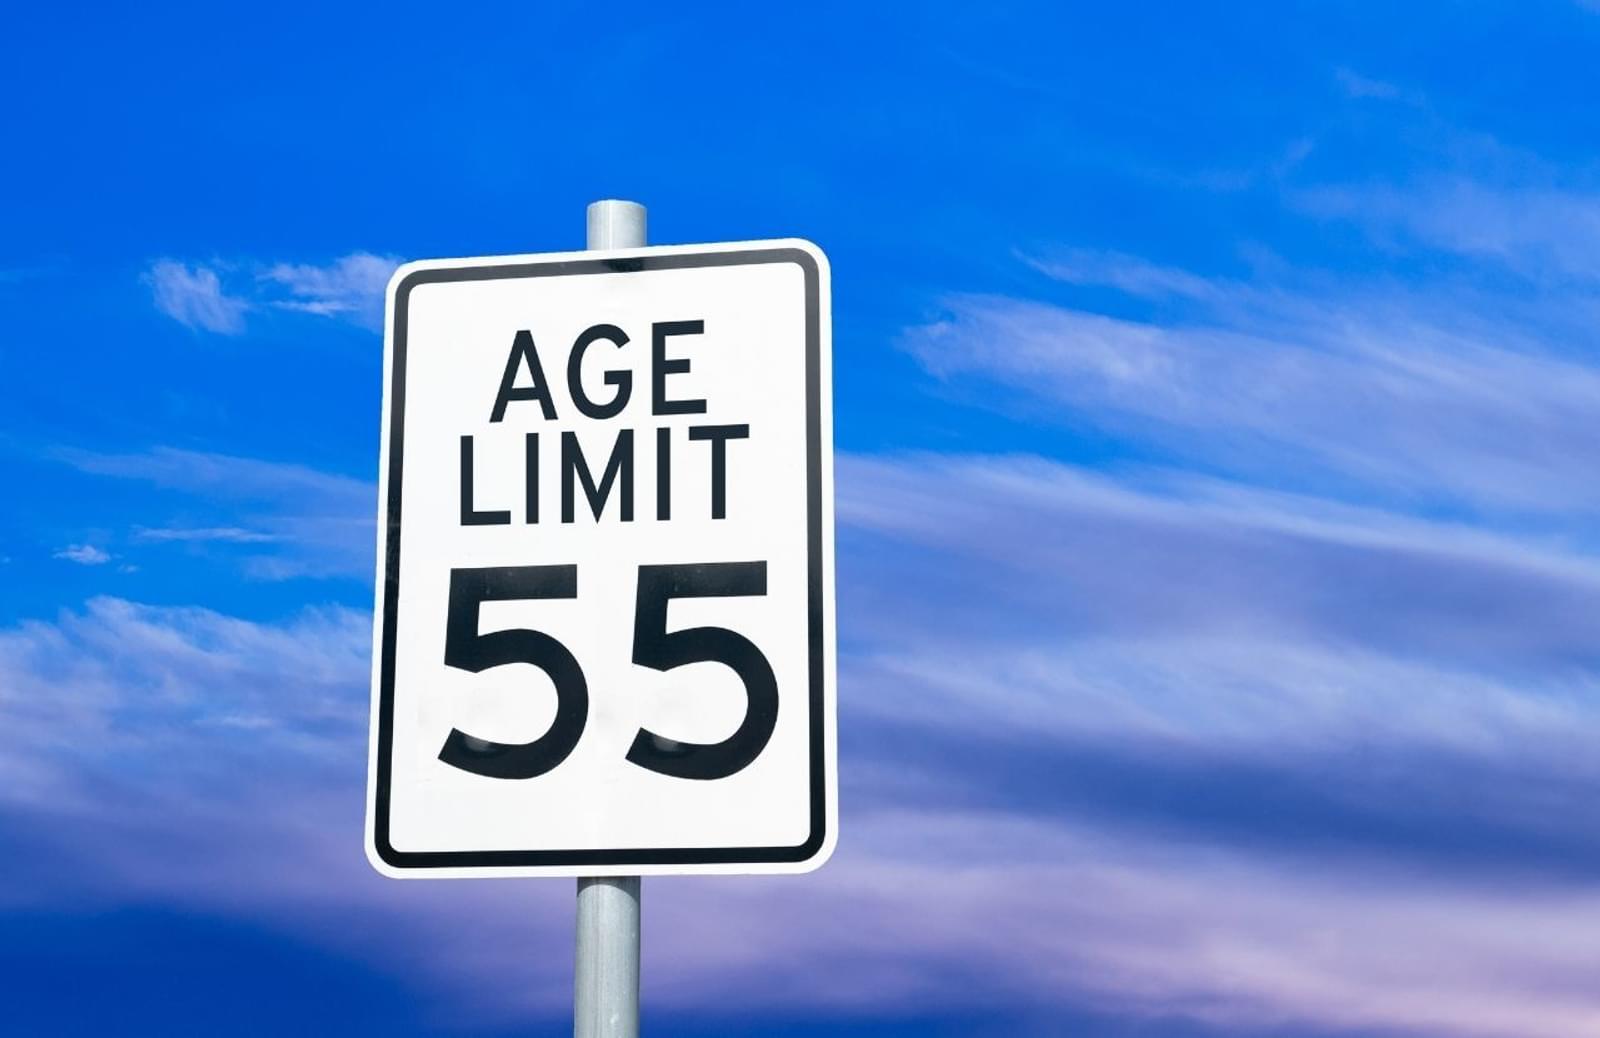 Street sign reading "Age Limit 55" against a blue sky